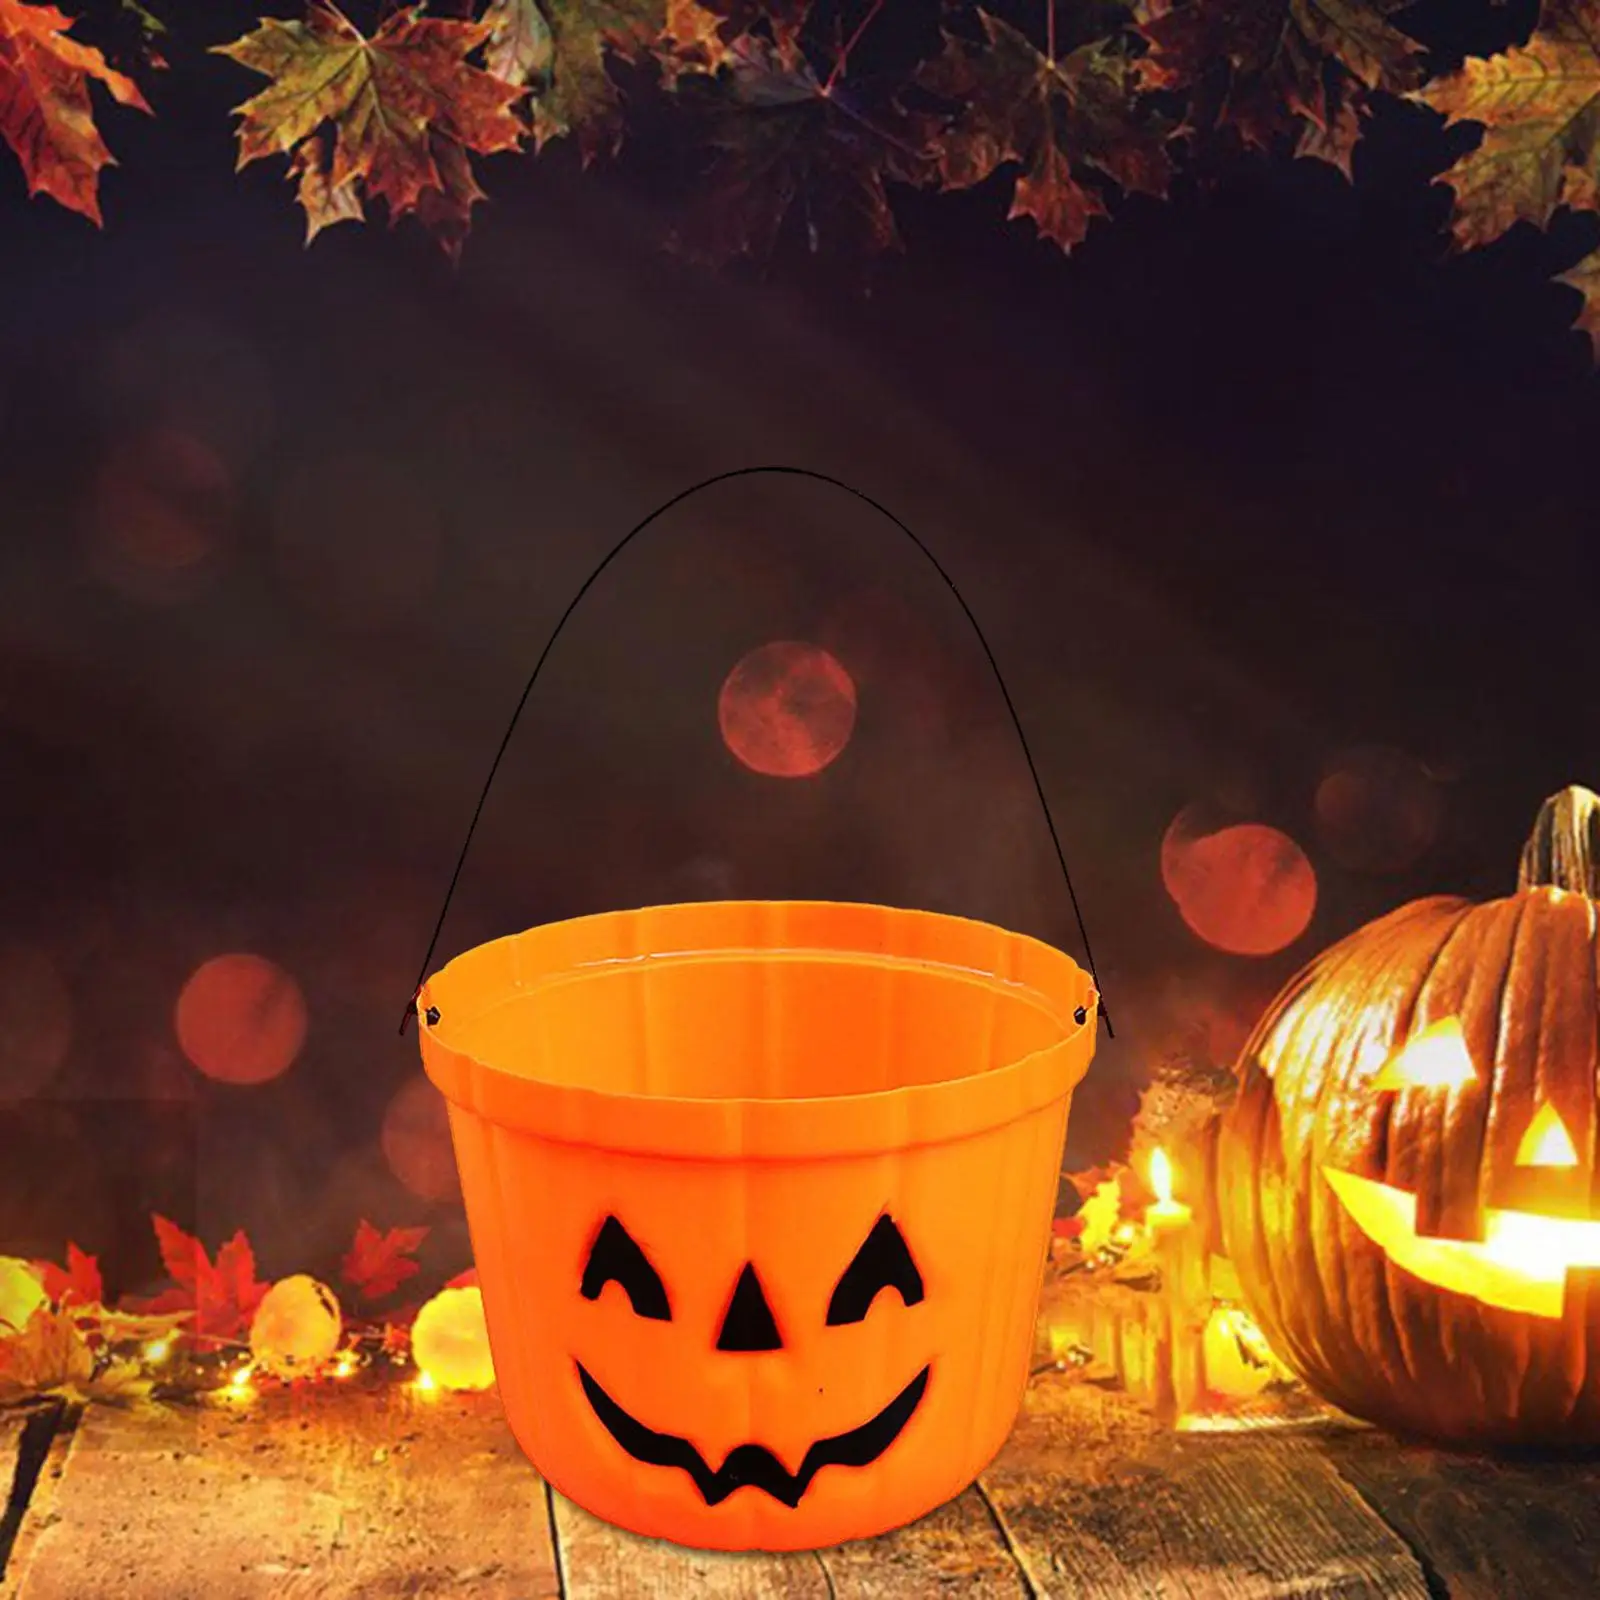 Halloween Pumpkin Bucket Candy Pail Basket with Handle Candy Holder for Cafes Living Rooms